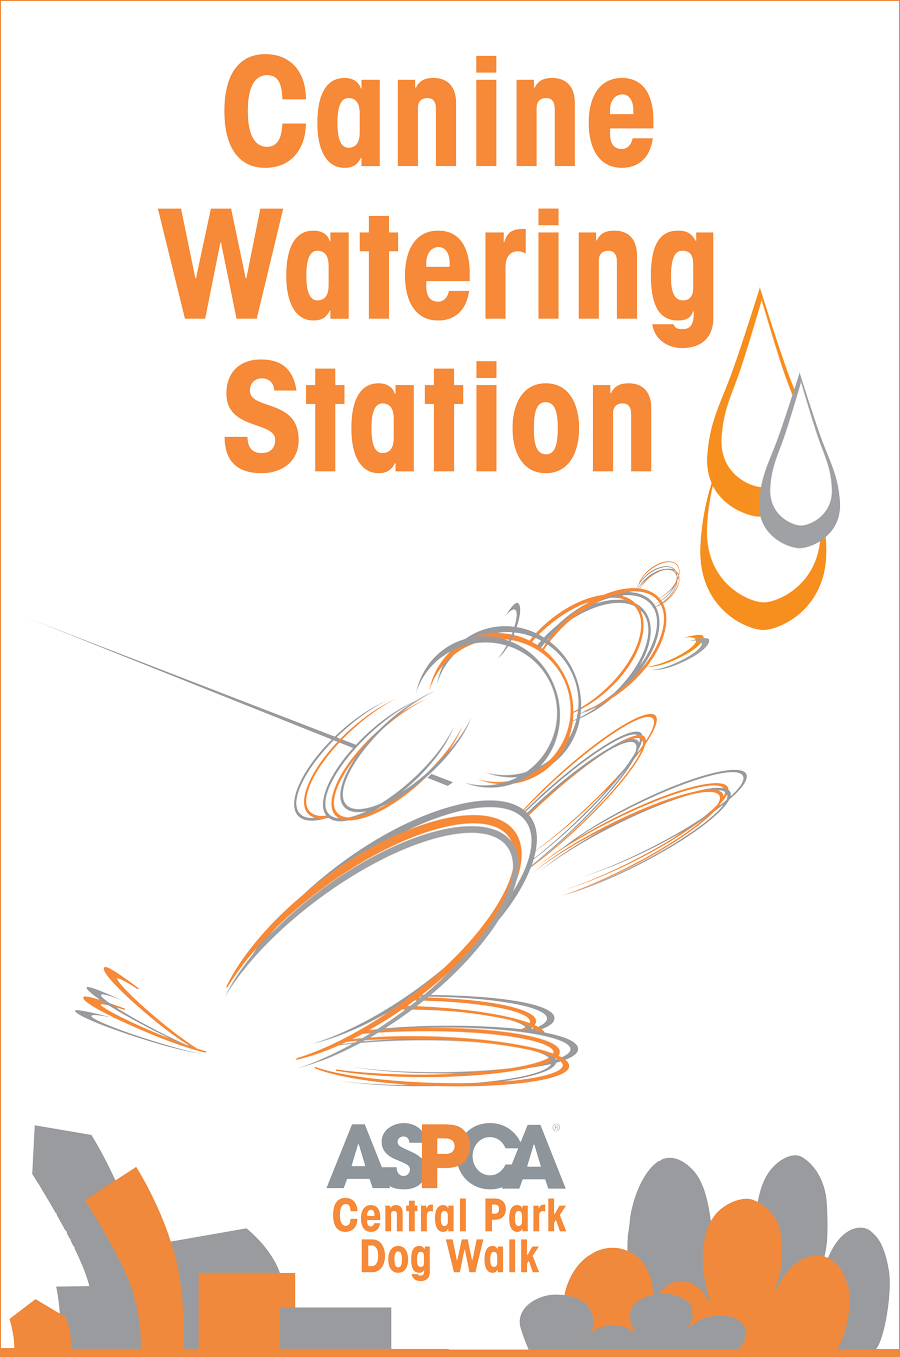 Canine Watering Station Banner